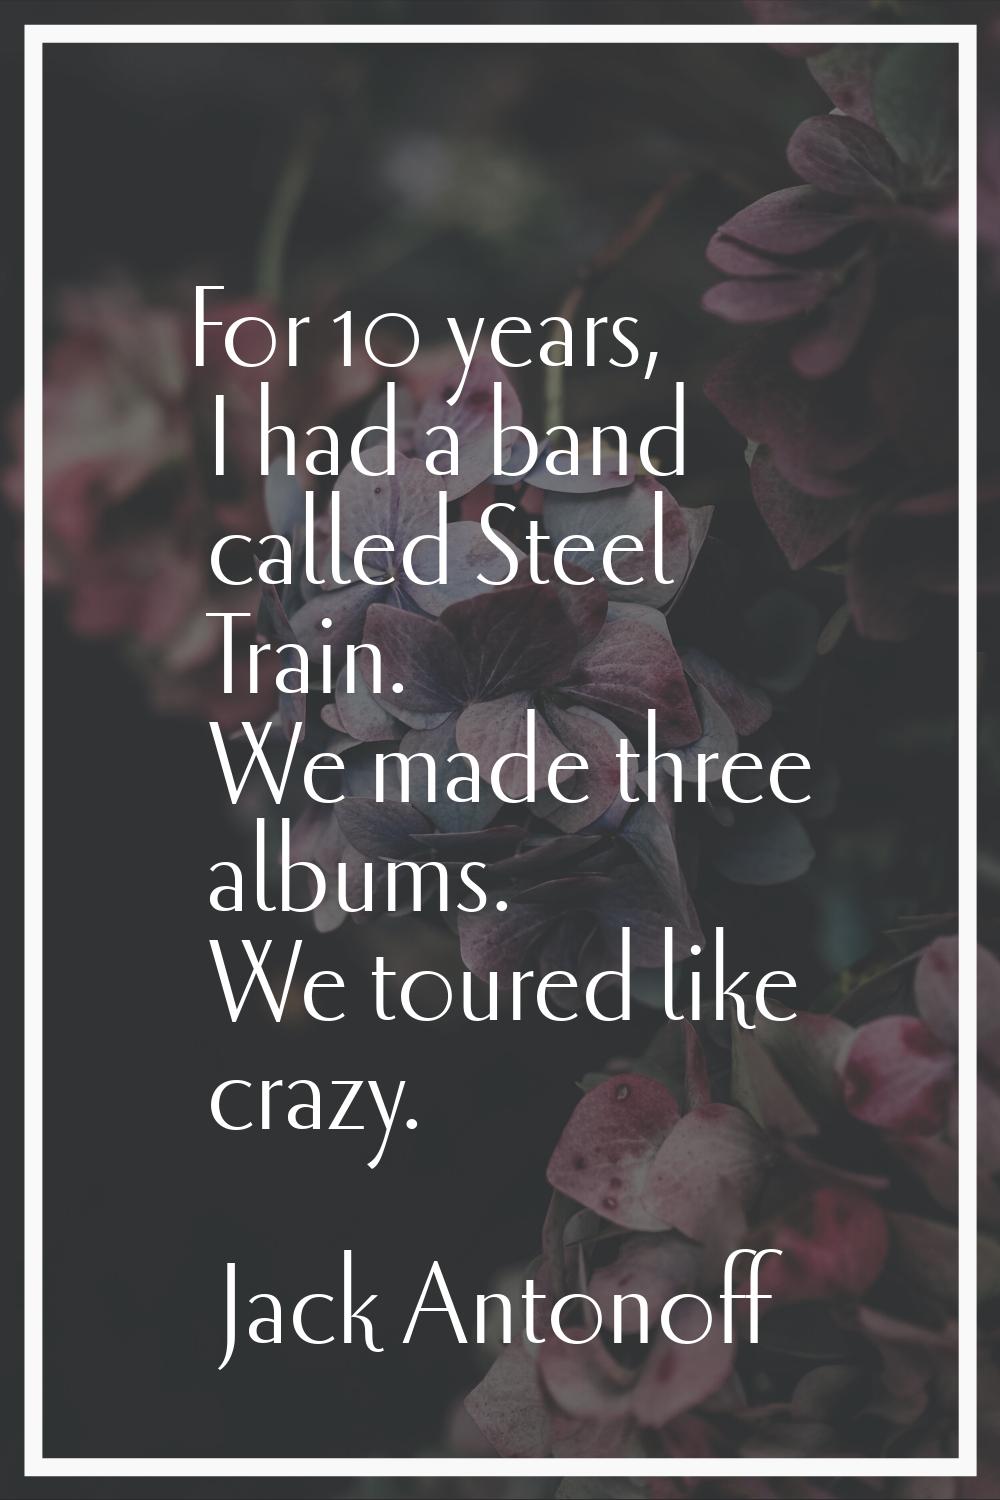 For 10 years, I had a band called Steel Train. We made three albums. We toured like crazy.